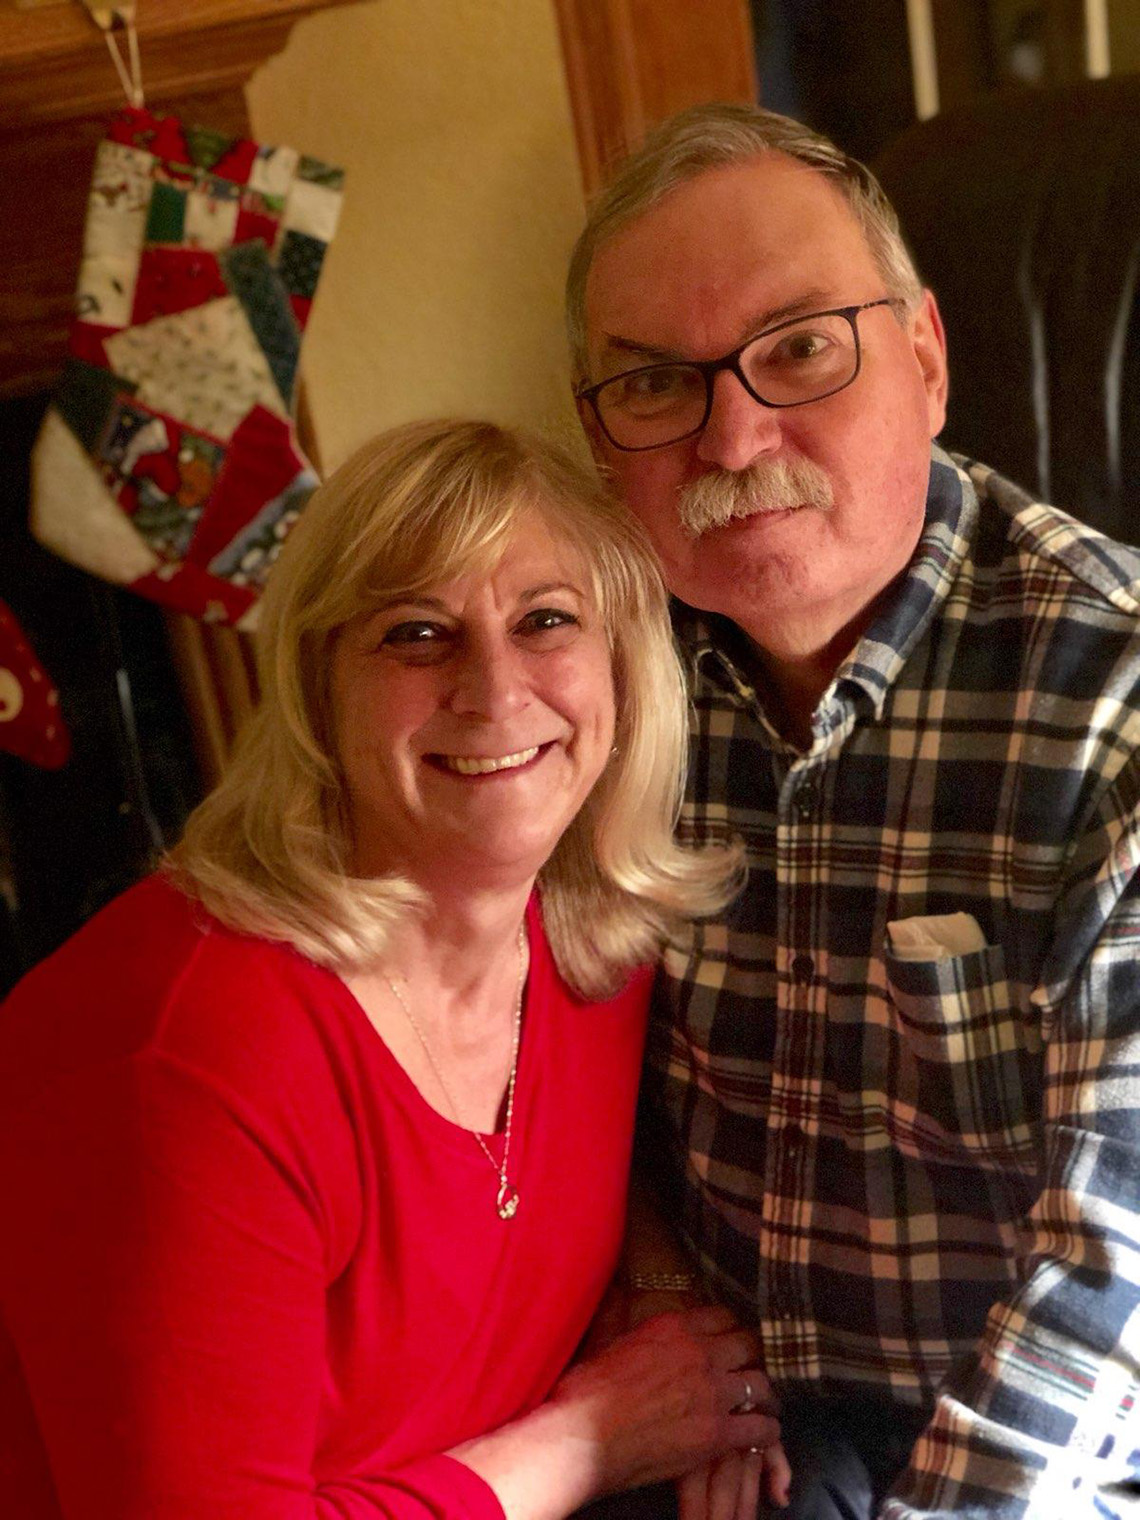 Carol Roche has been caring for her husband, Dave, after he was diagnosed with multiple sclerosis